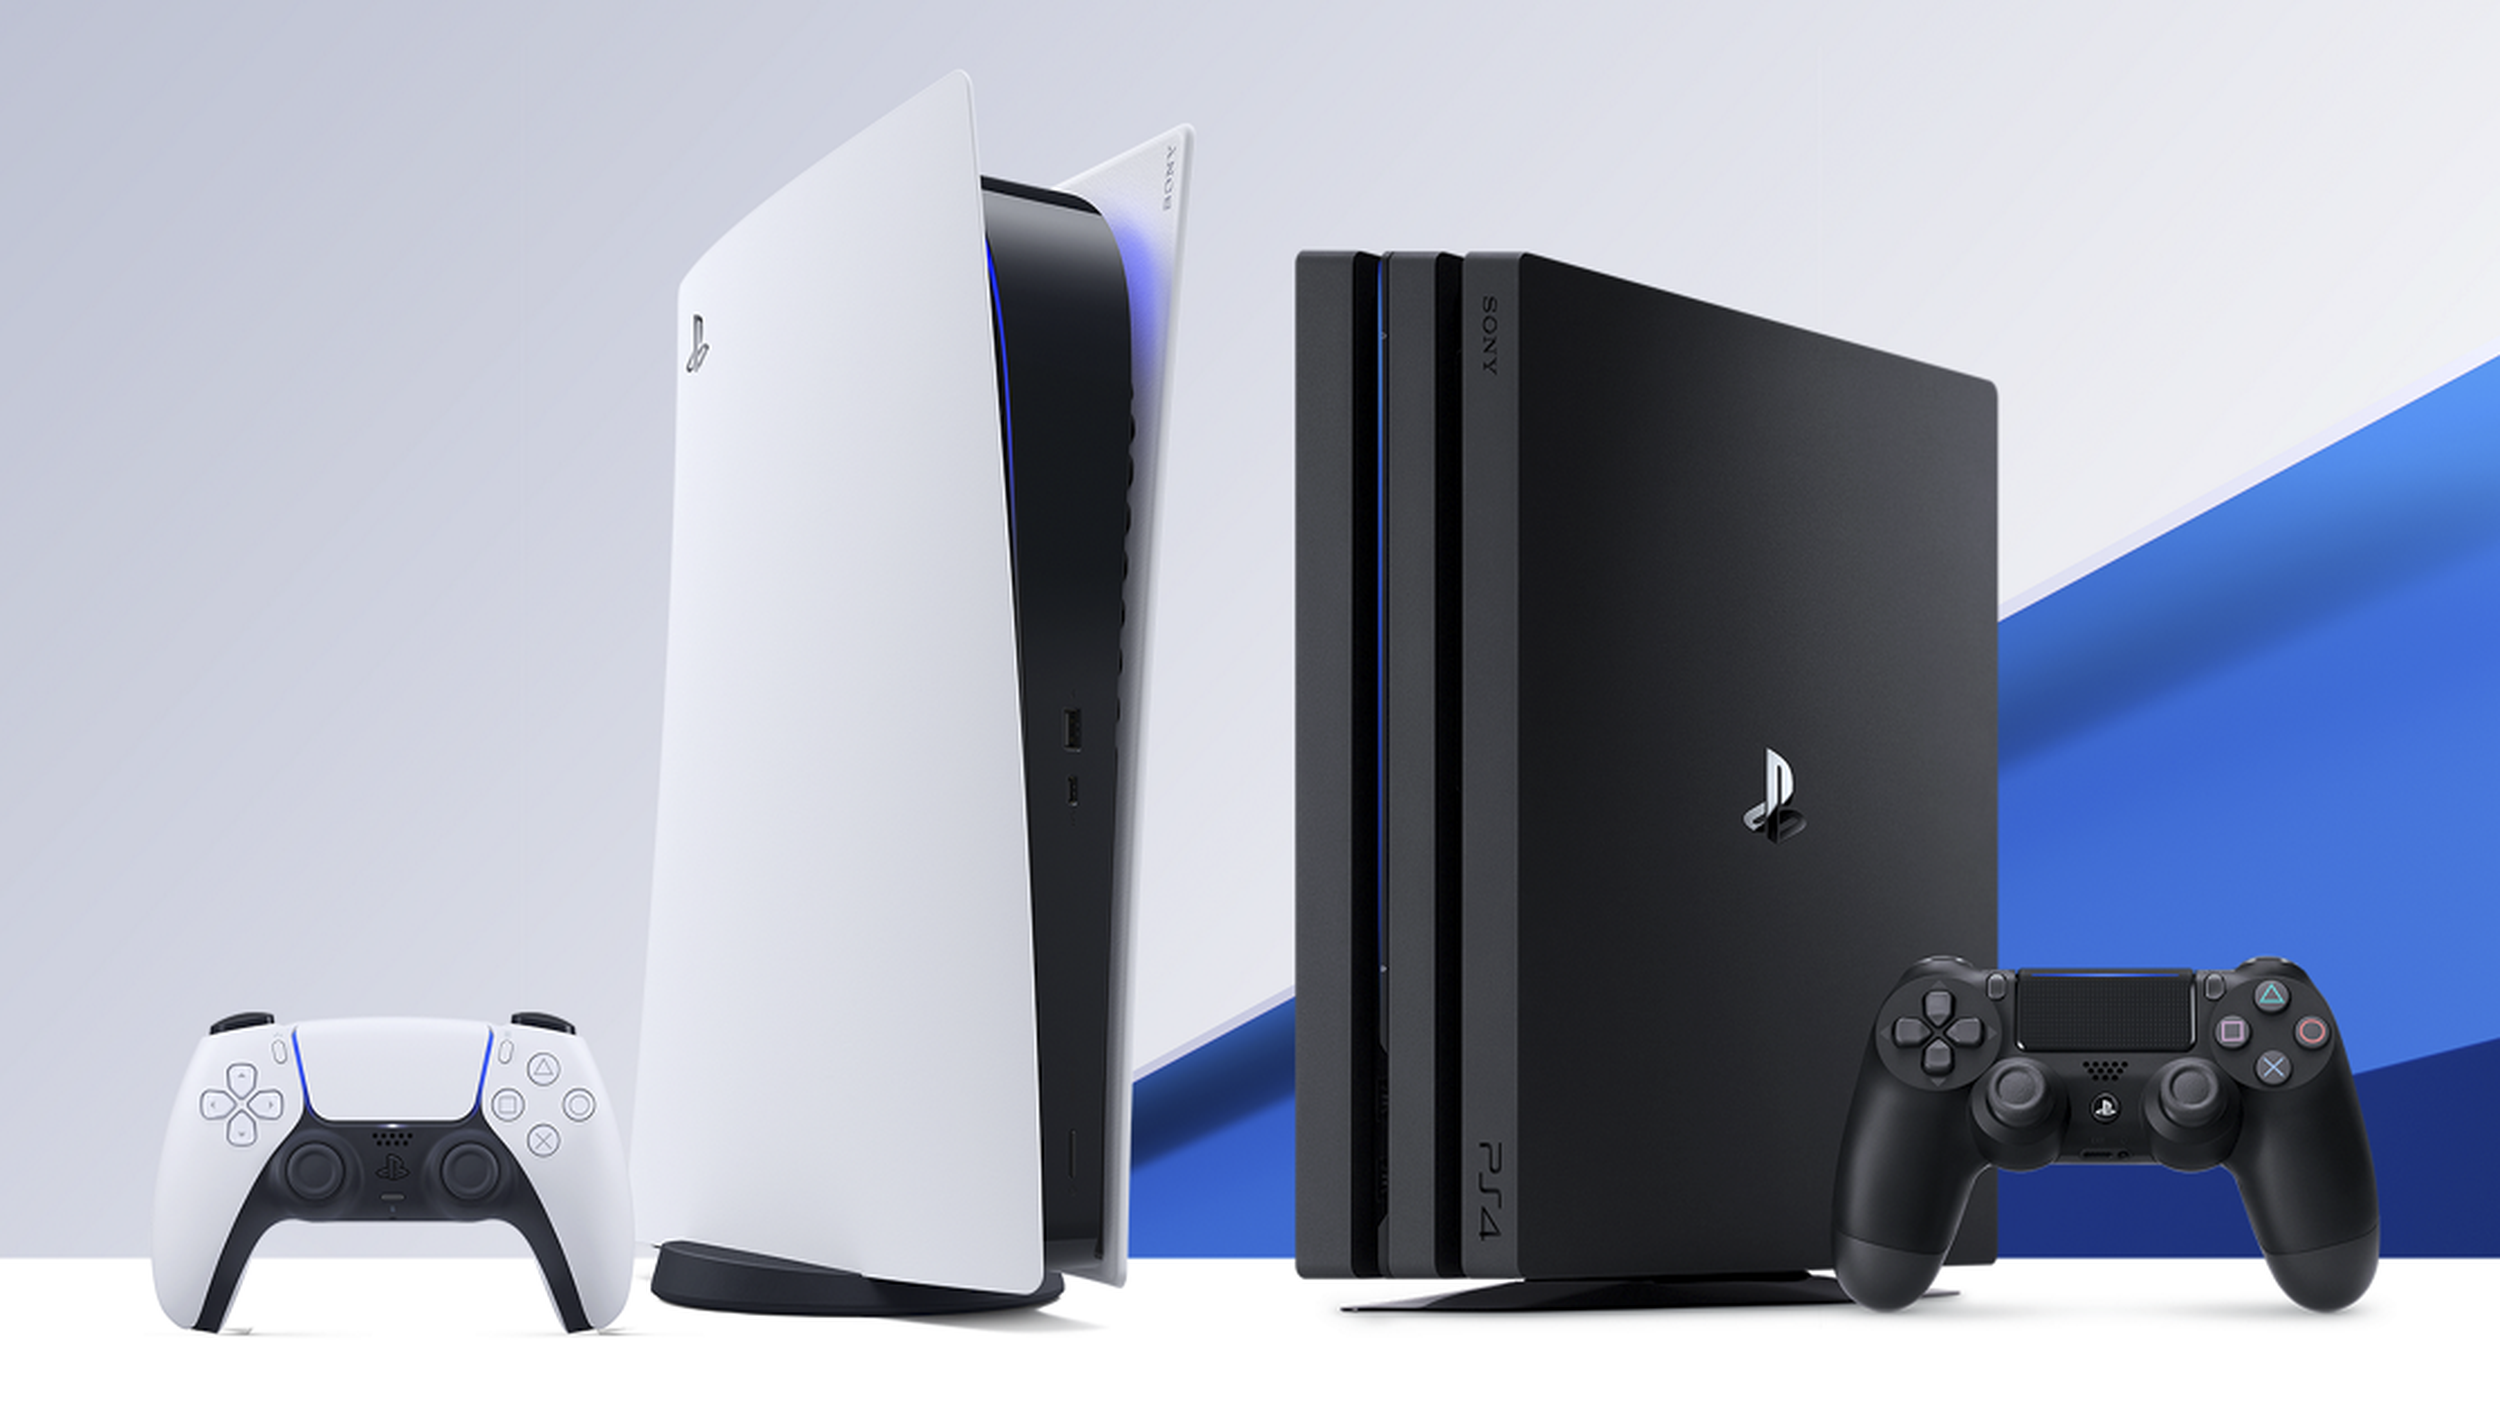 Game On PlayStation 4 will be phased out starting in 2025, and that’s